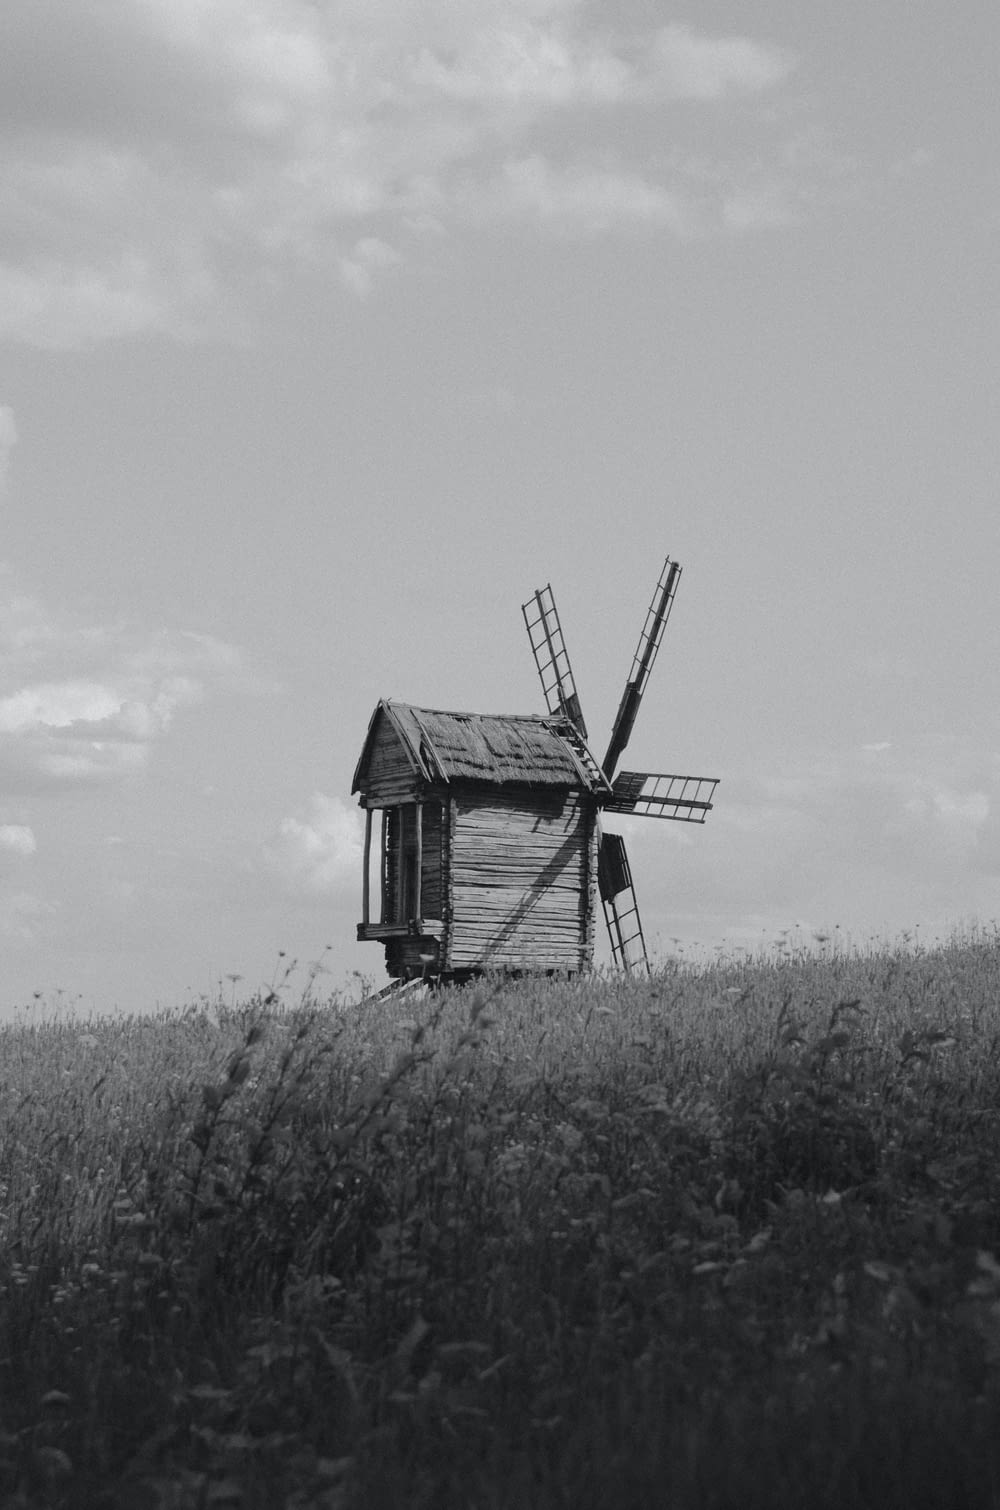 a black and white photo of a windmill in a field